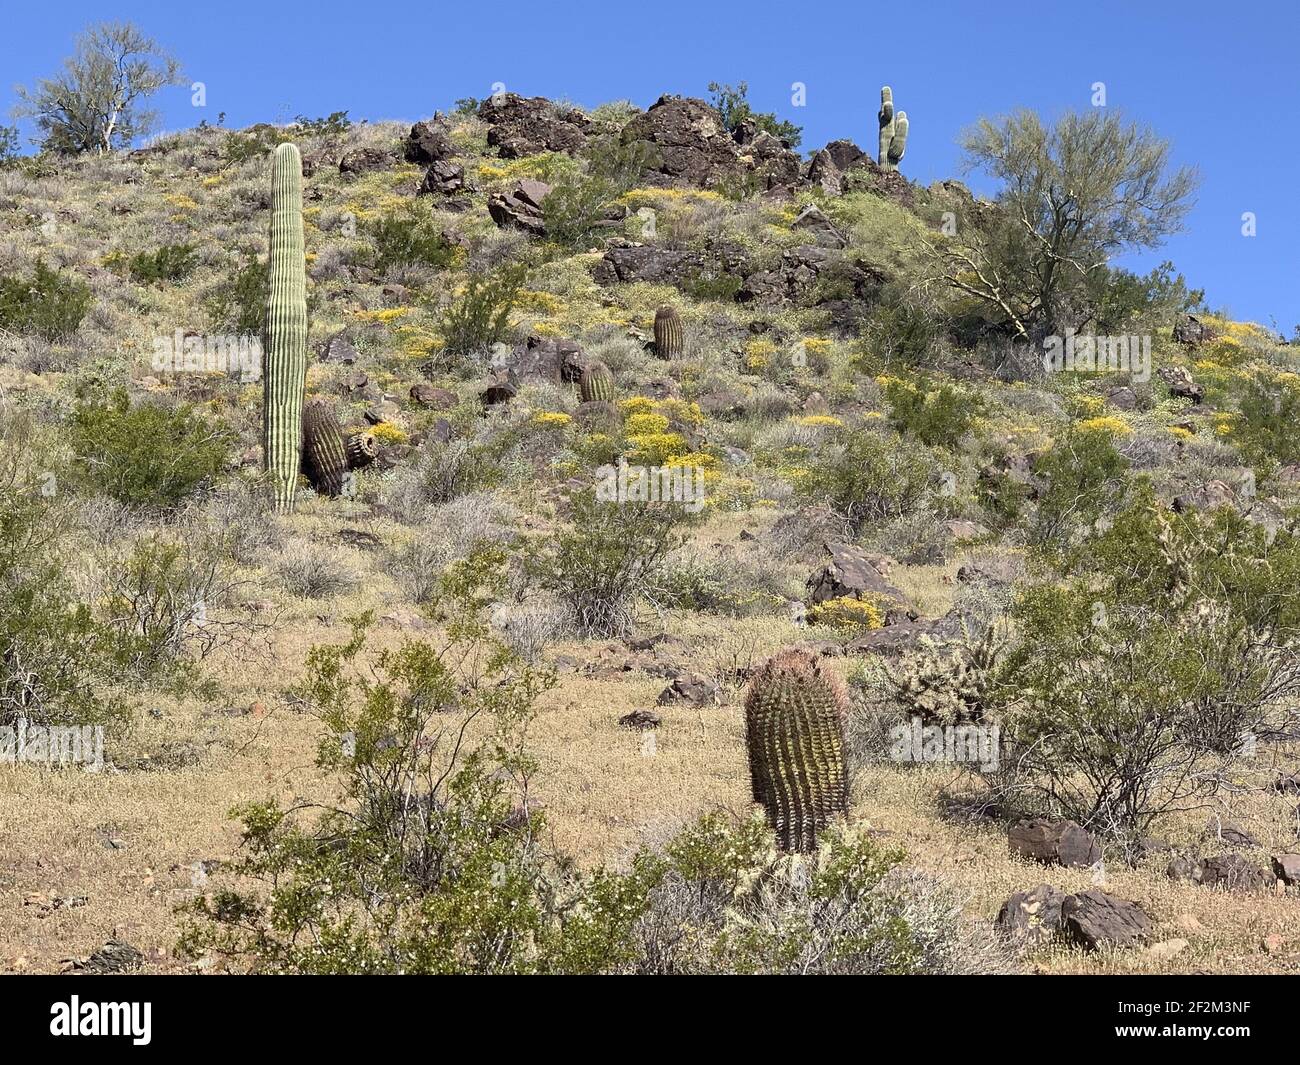 A landscape of a desert with various cactus plants Stock Photo